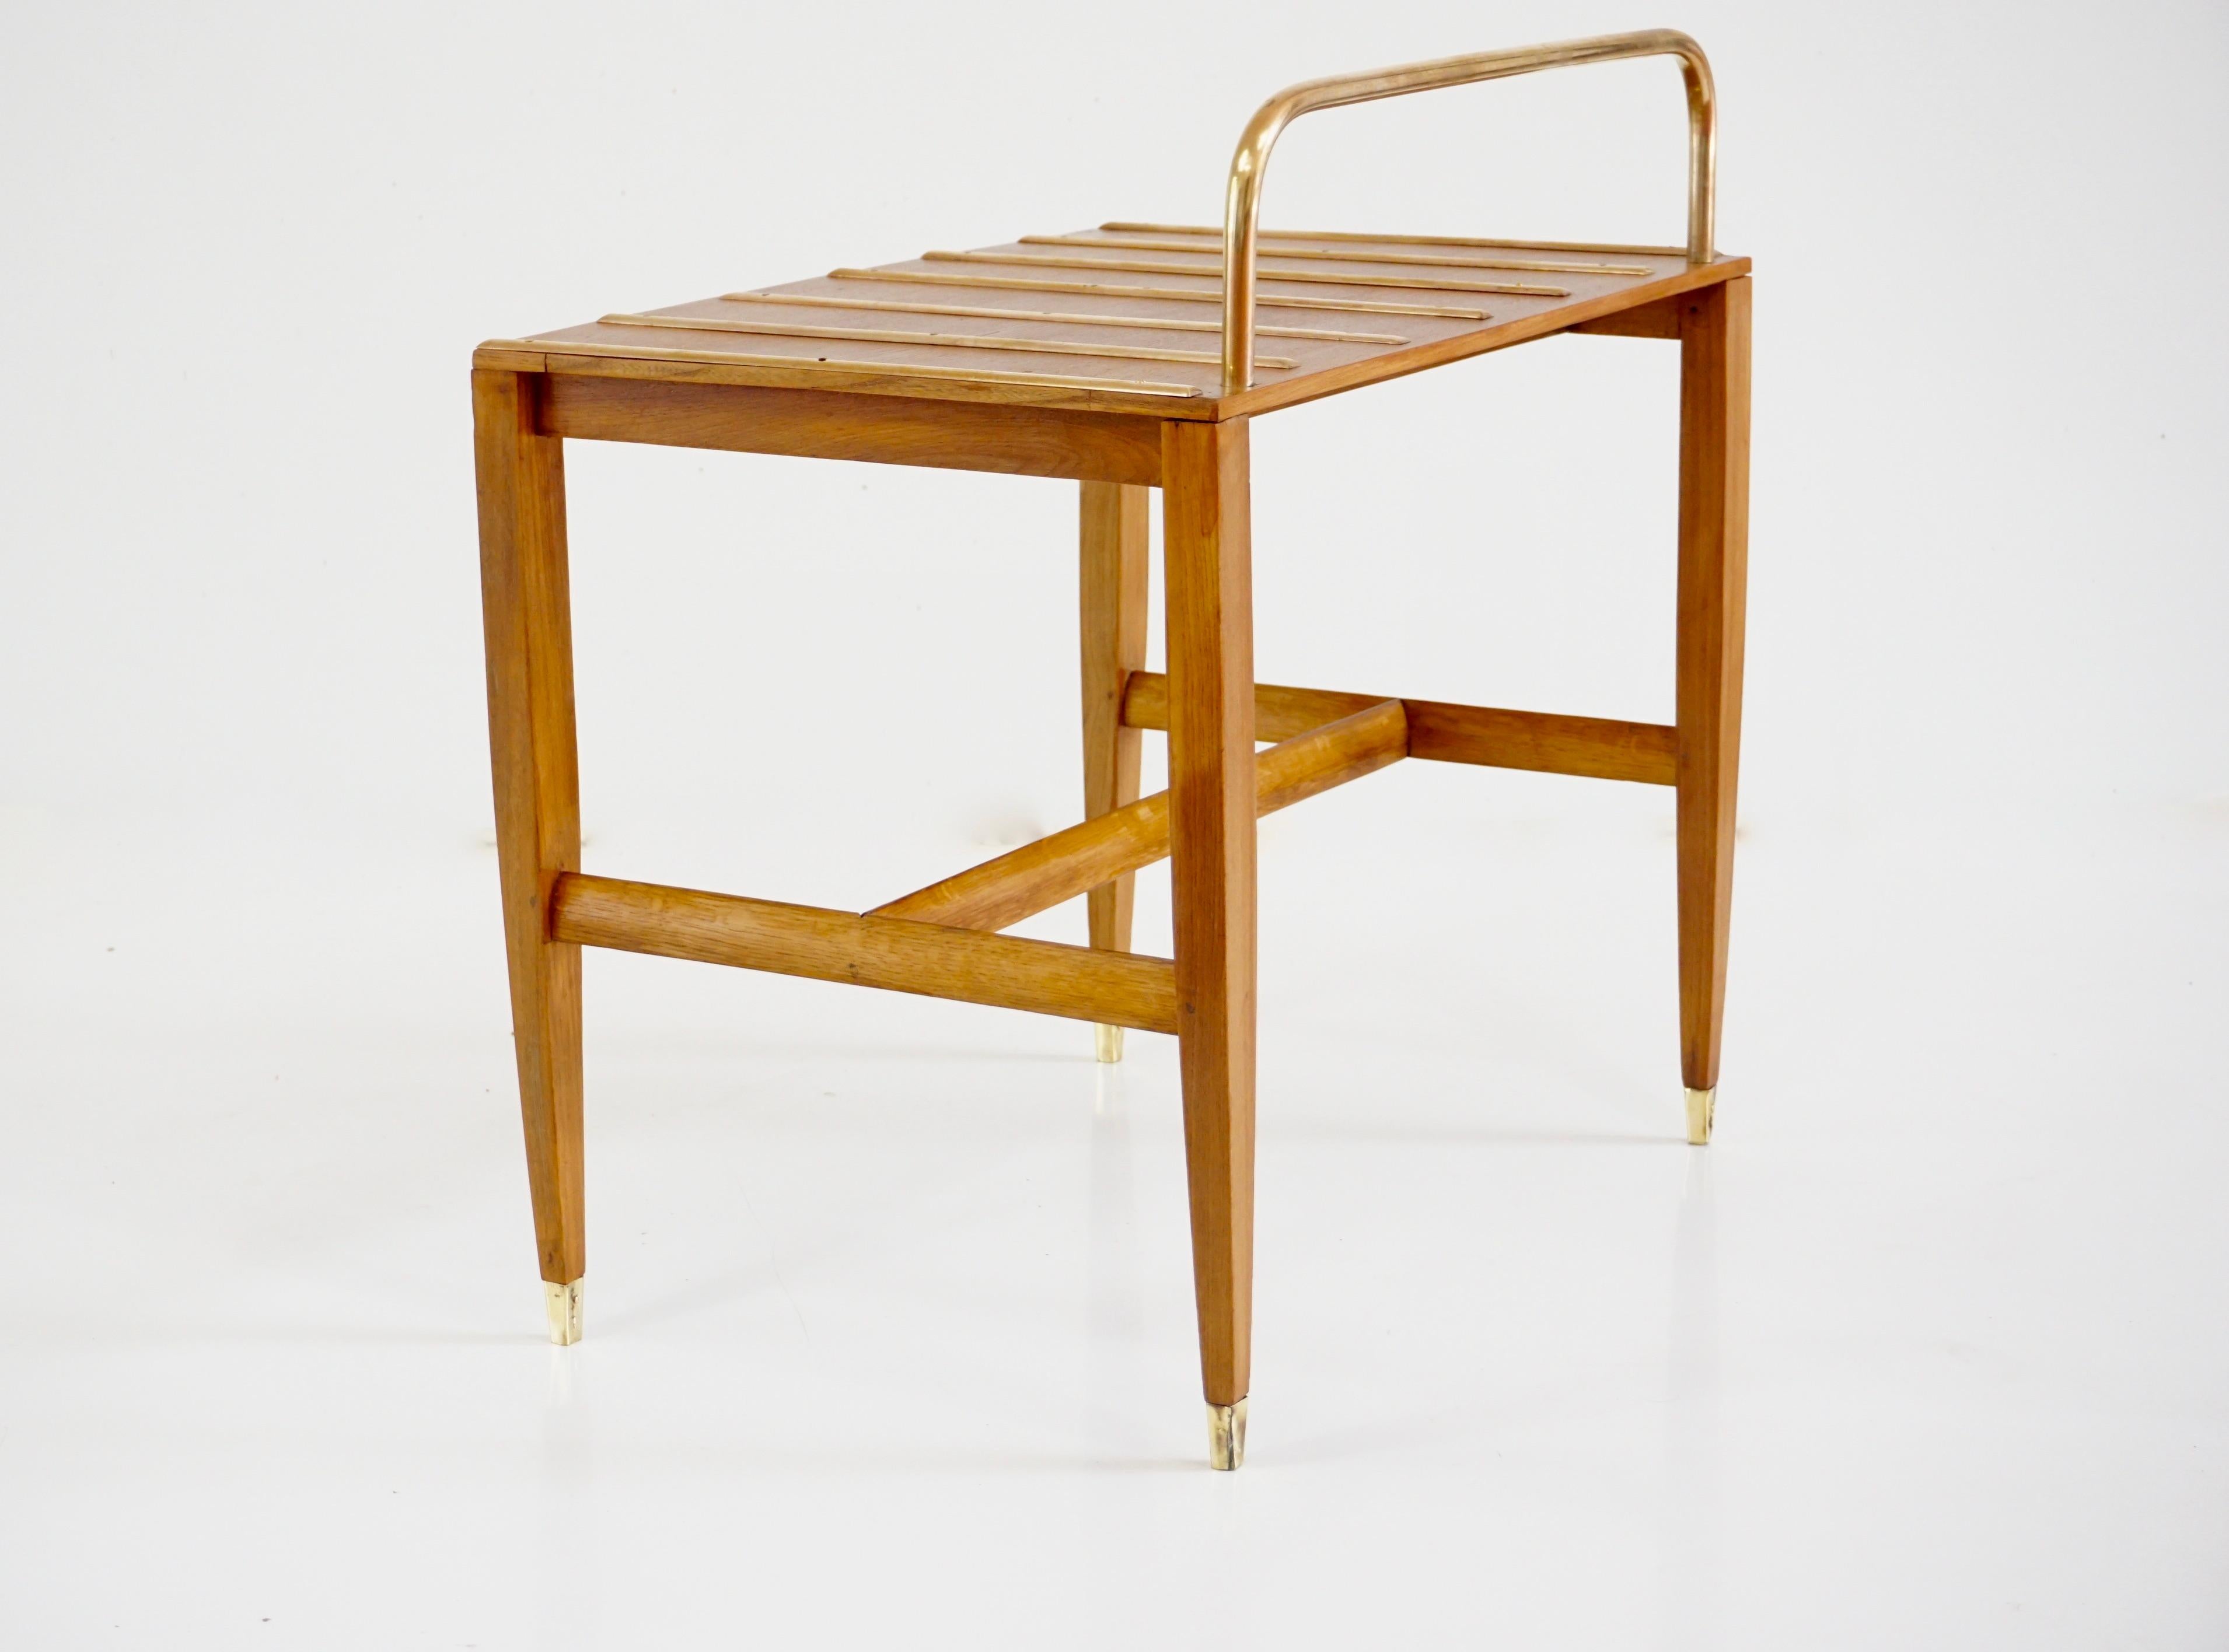 Gio Ponti Walnut Side Table, Luggage Rack for Hotel Royal Naples, 1955 For Sale 9